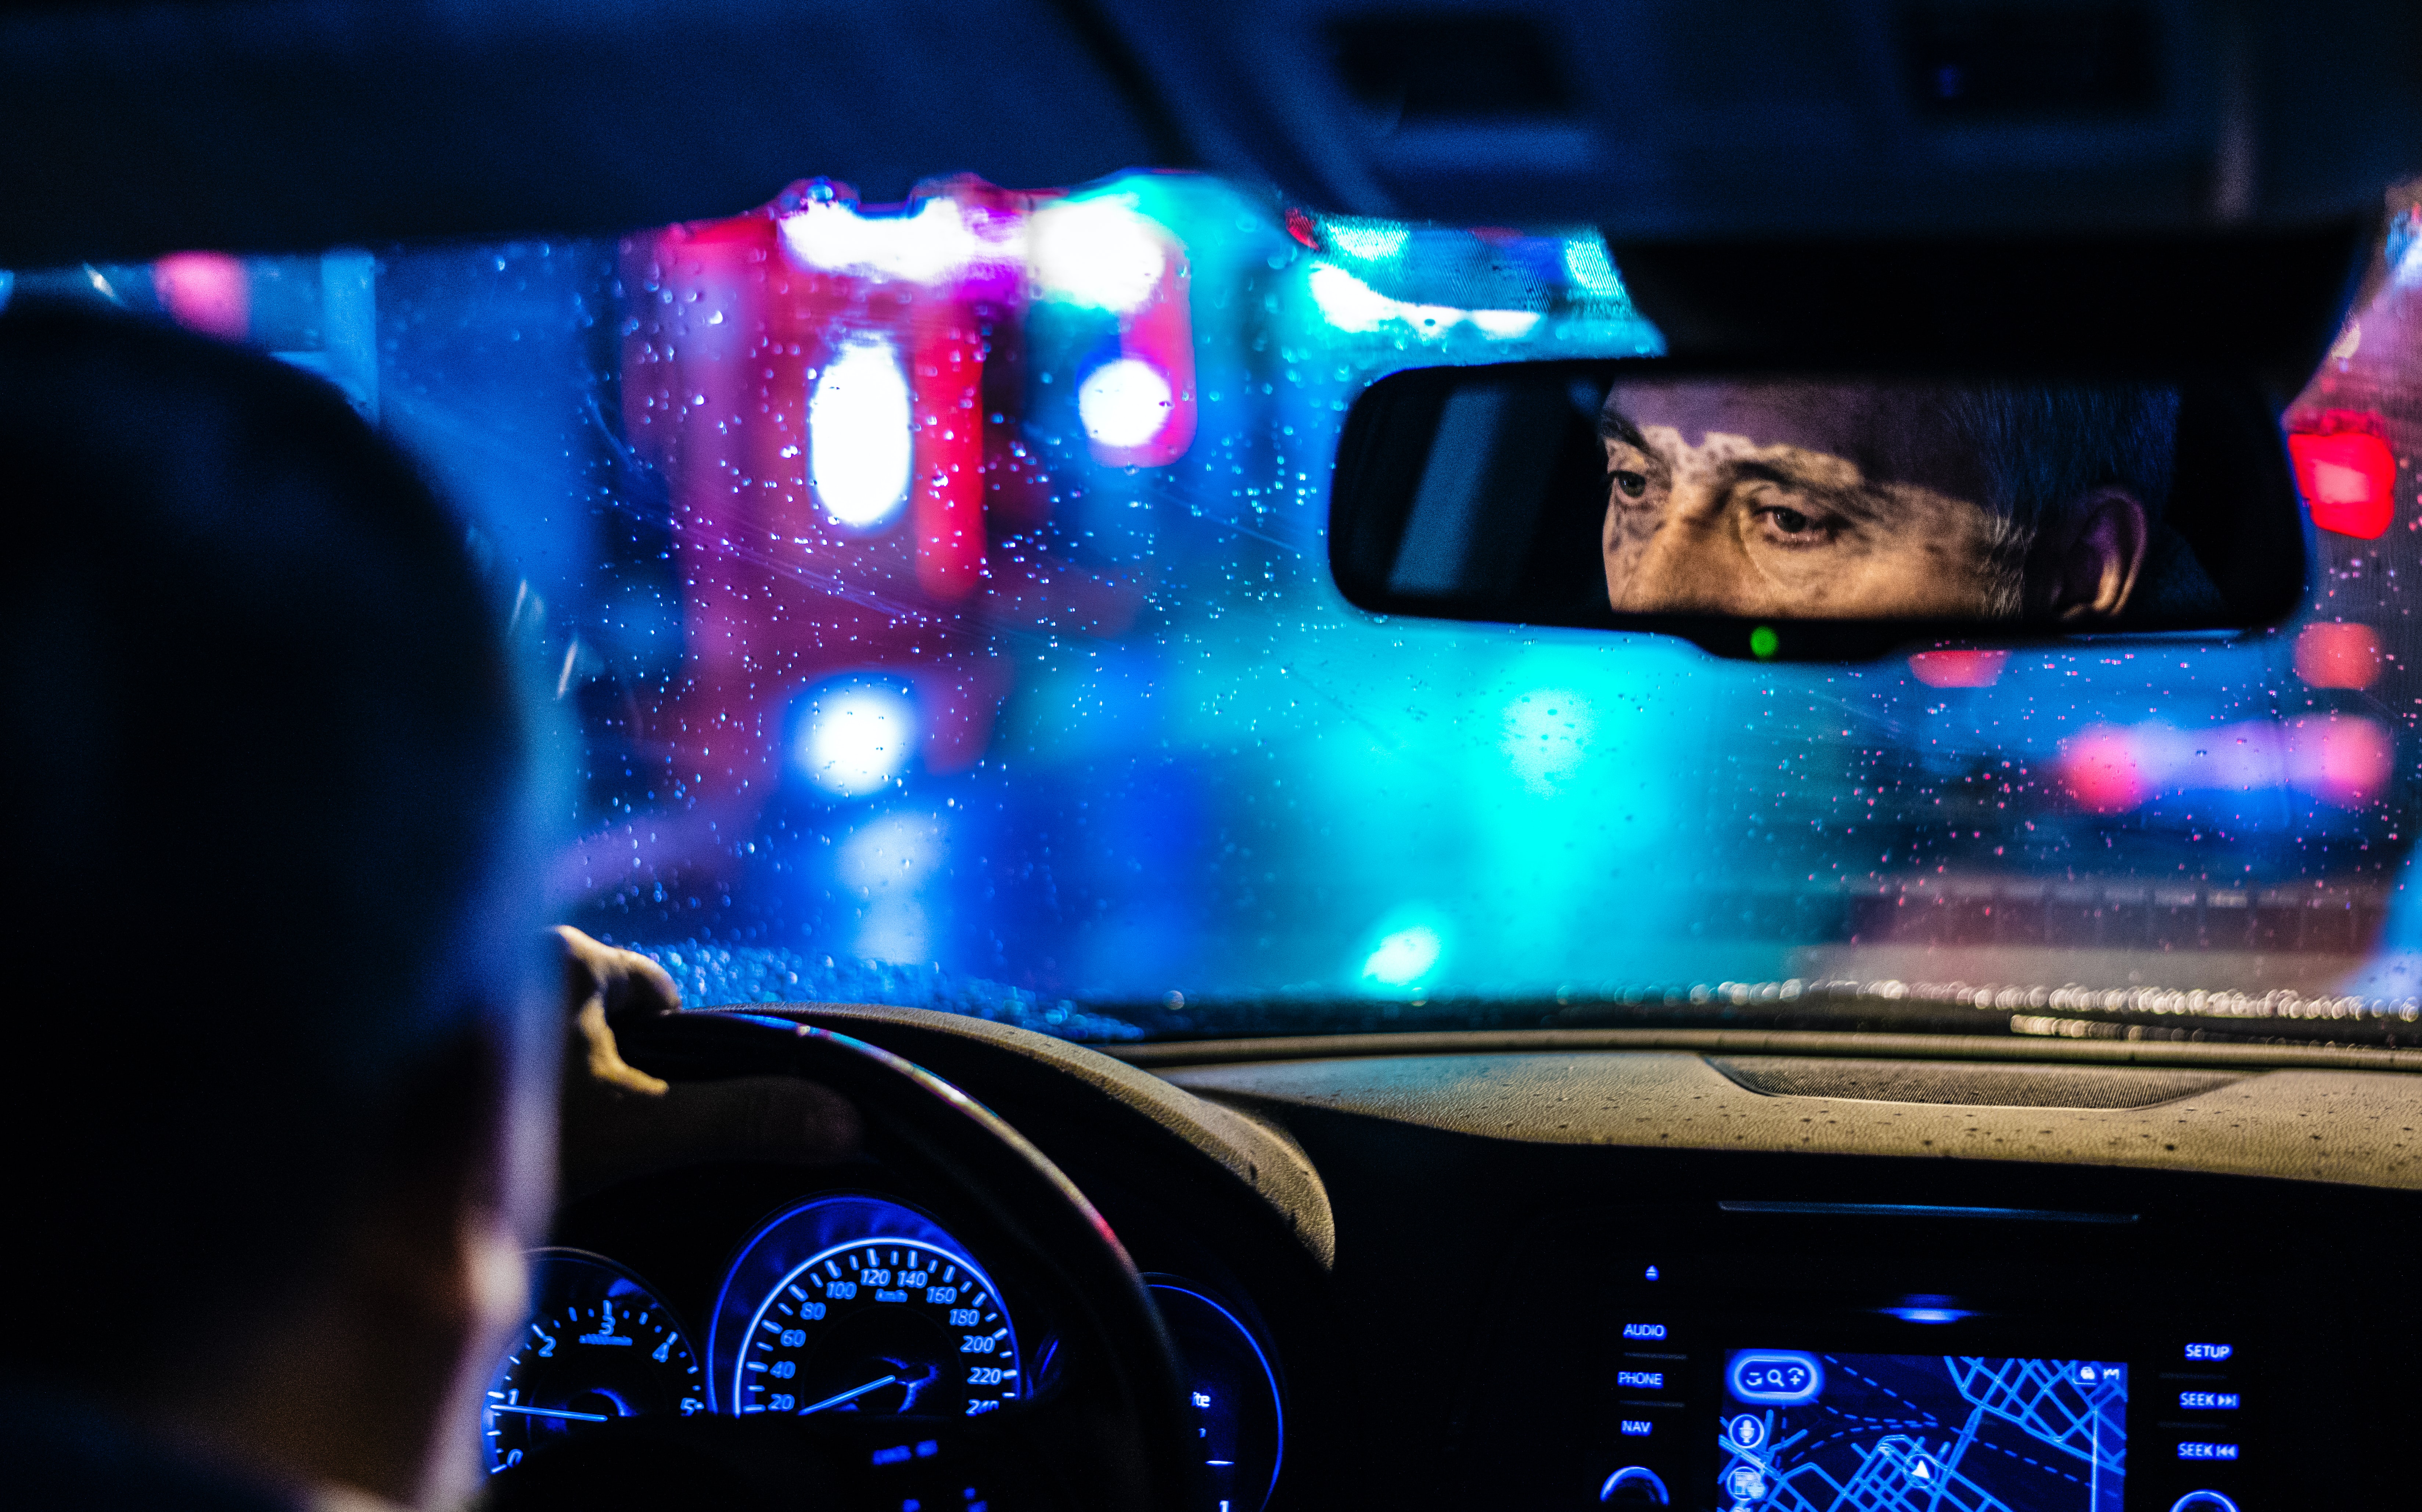 Driving at Night - Driving Safety Tips